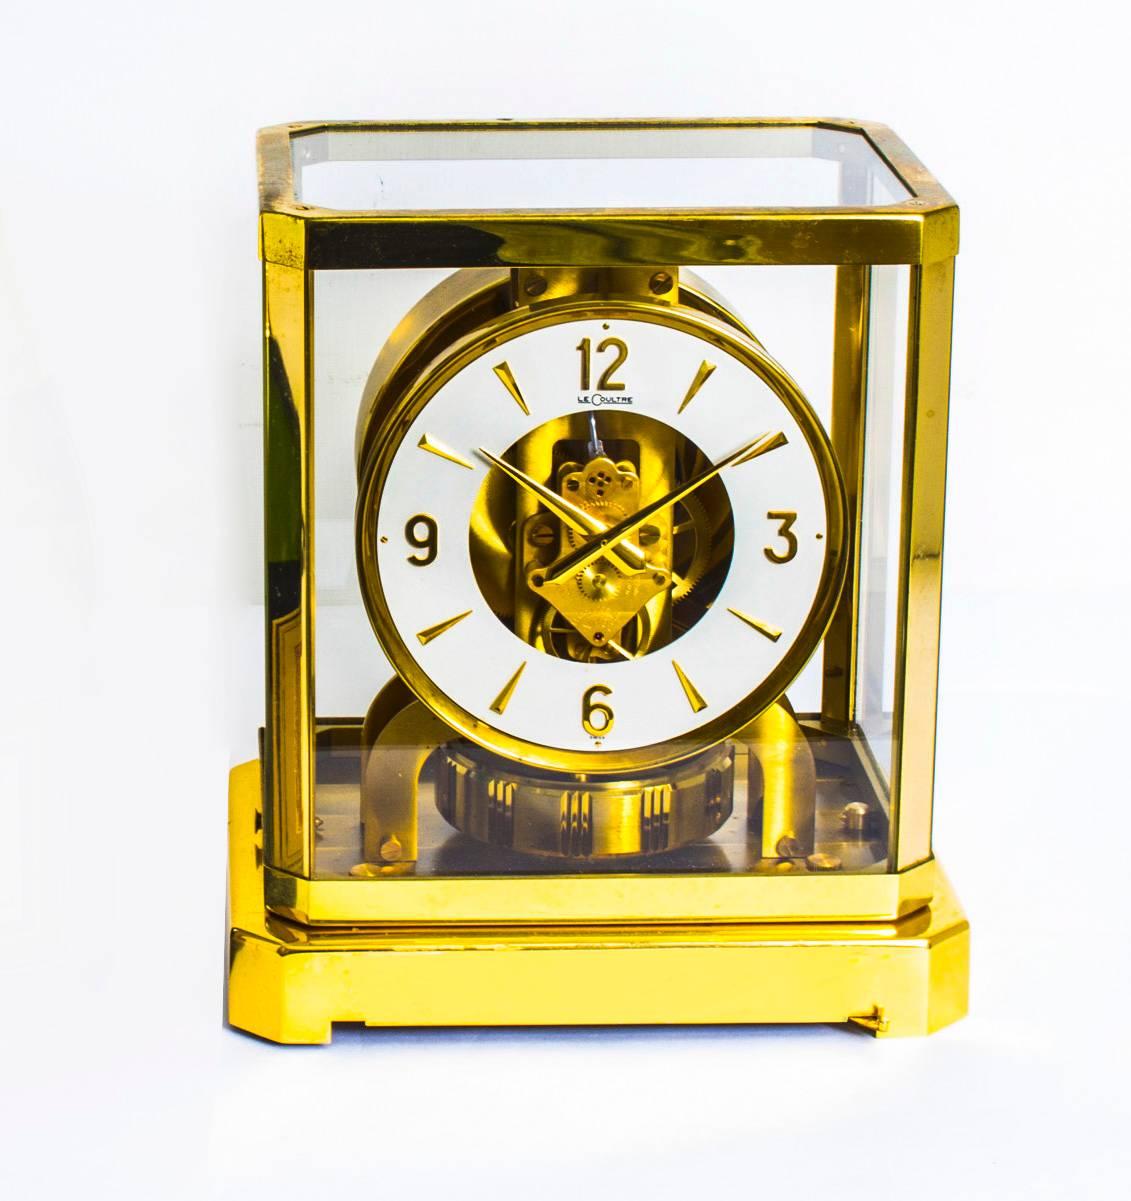 This is beautiful and very decorative Vintage Atmos mantel clock by Jaeger-LeCoultre.

The clock is displayed in a polished gilt rectangular brass case that lifts off to allow access to the movement.

The clock self-winds and keeps time on